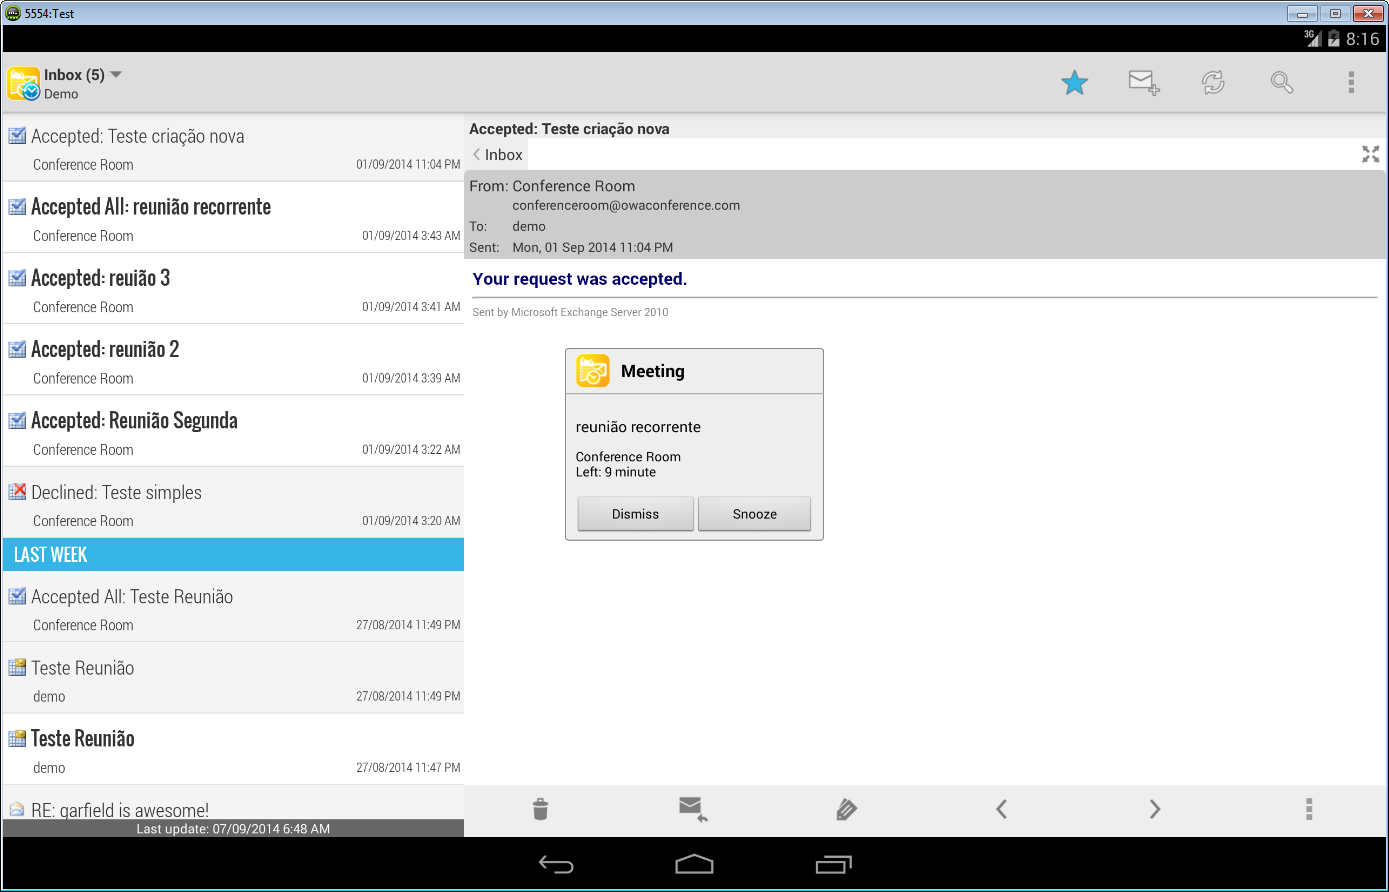    Mobile Access for Outlook OWA- screenshot  